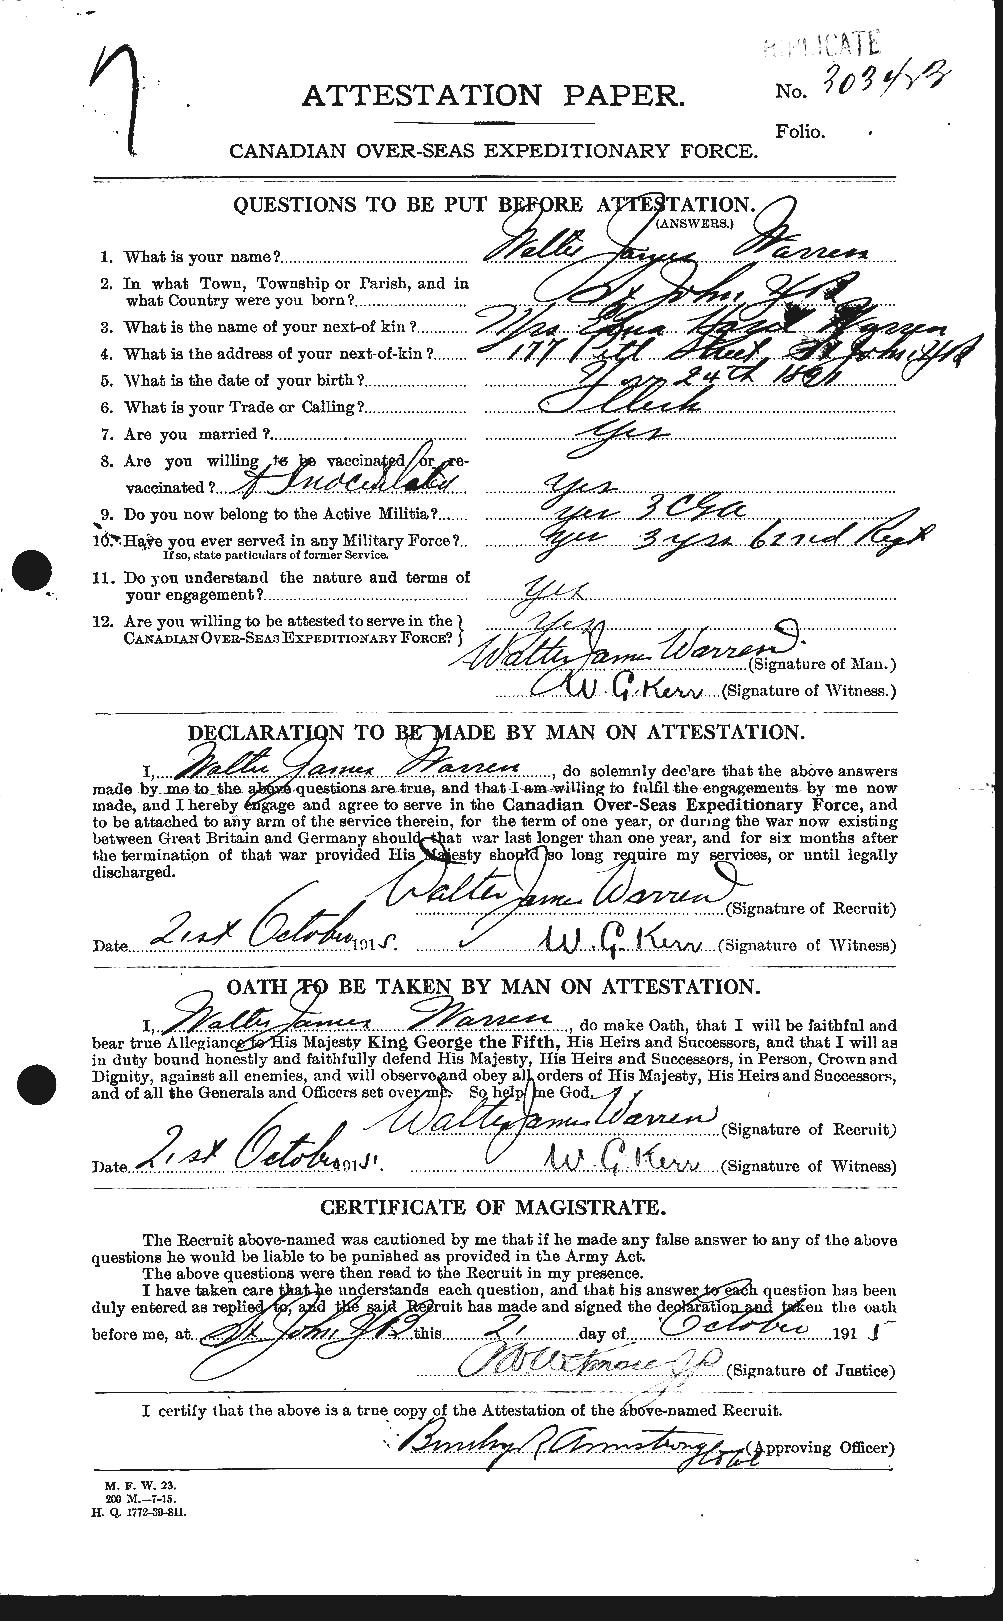 Personnel Records of the First World War - CEF 658656a